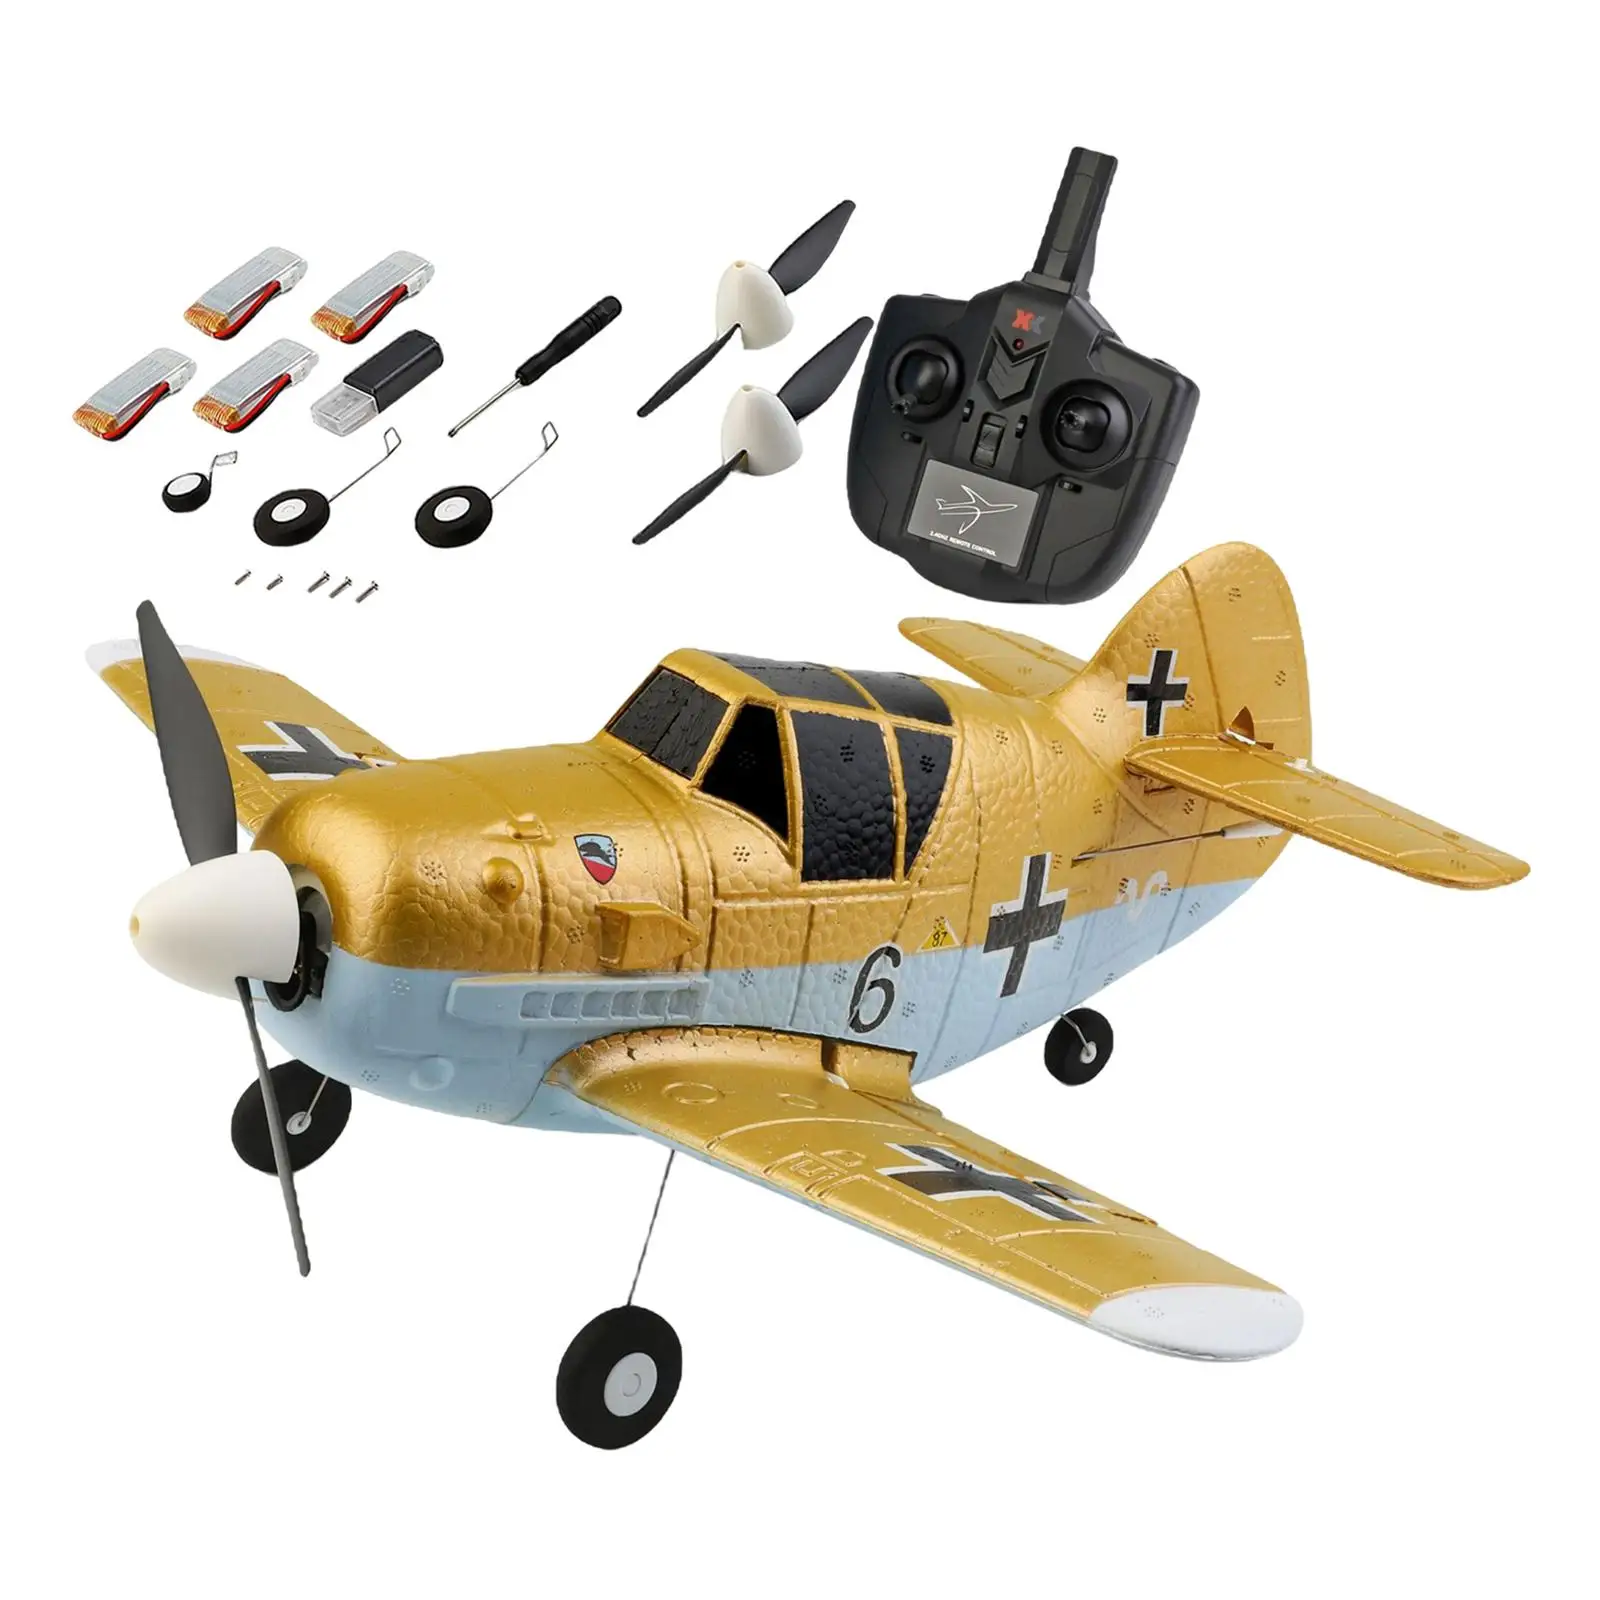 XK A250 4 Channel EPP Aircraft Smart Balance RC Plane Scale Model Airplane enlarge